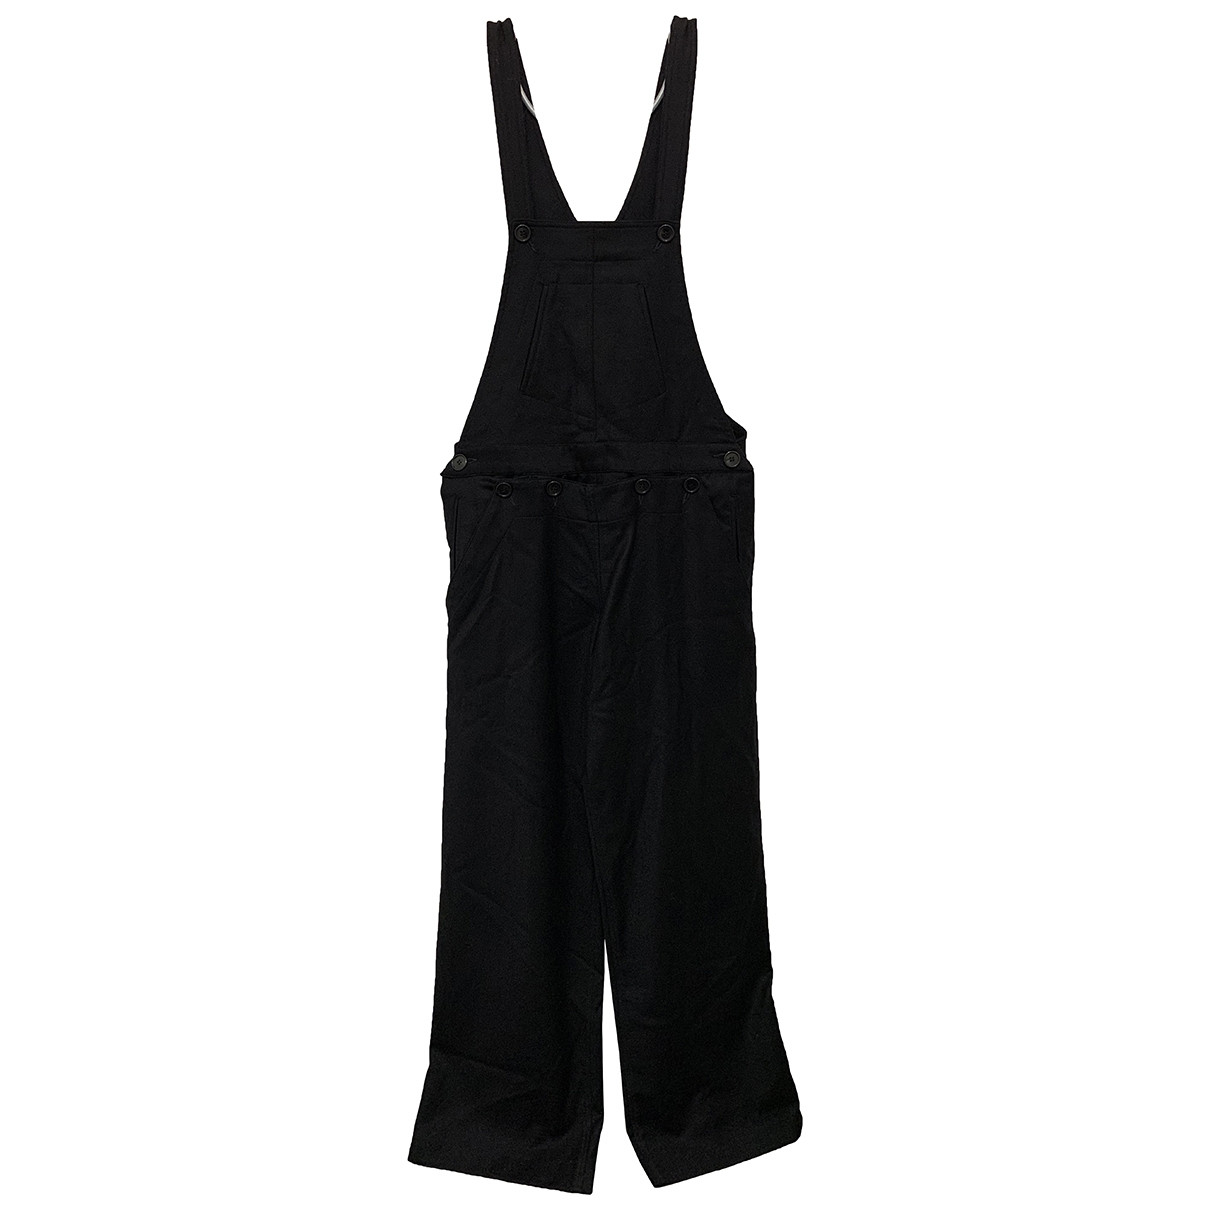 clothing Isabel Marant Etoile jumpsuits for Female Wool 1 0-5. Used condition